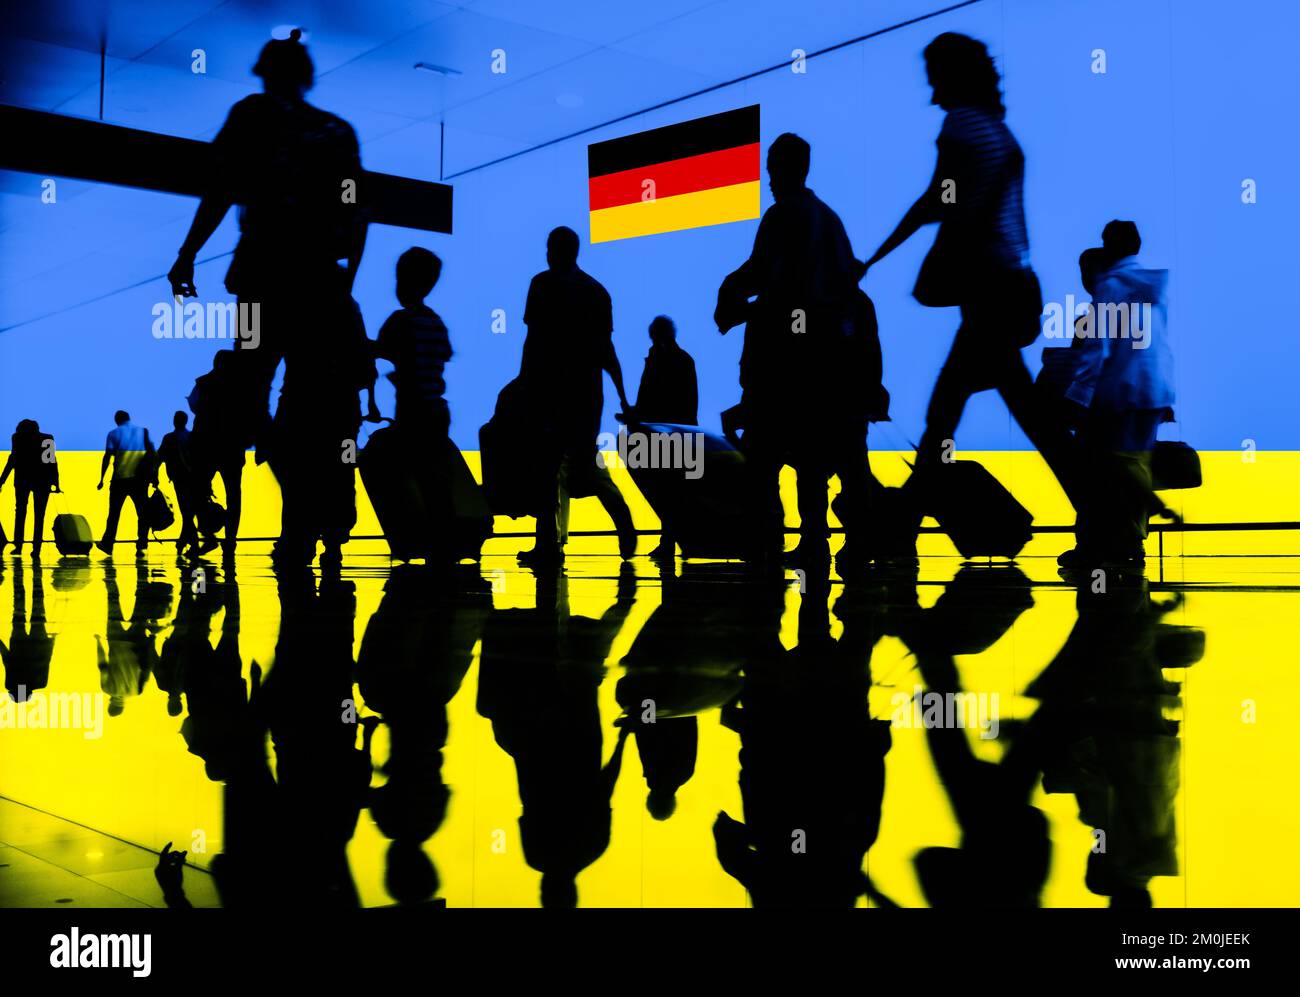 Flags of Germany and Ukraine: refugees, asylum, immigration, war, conflict...Concept Stock Photo